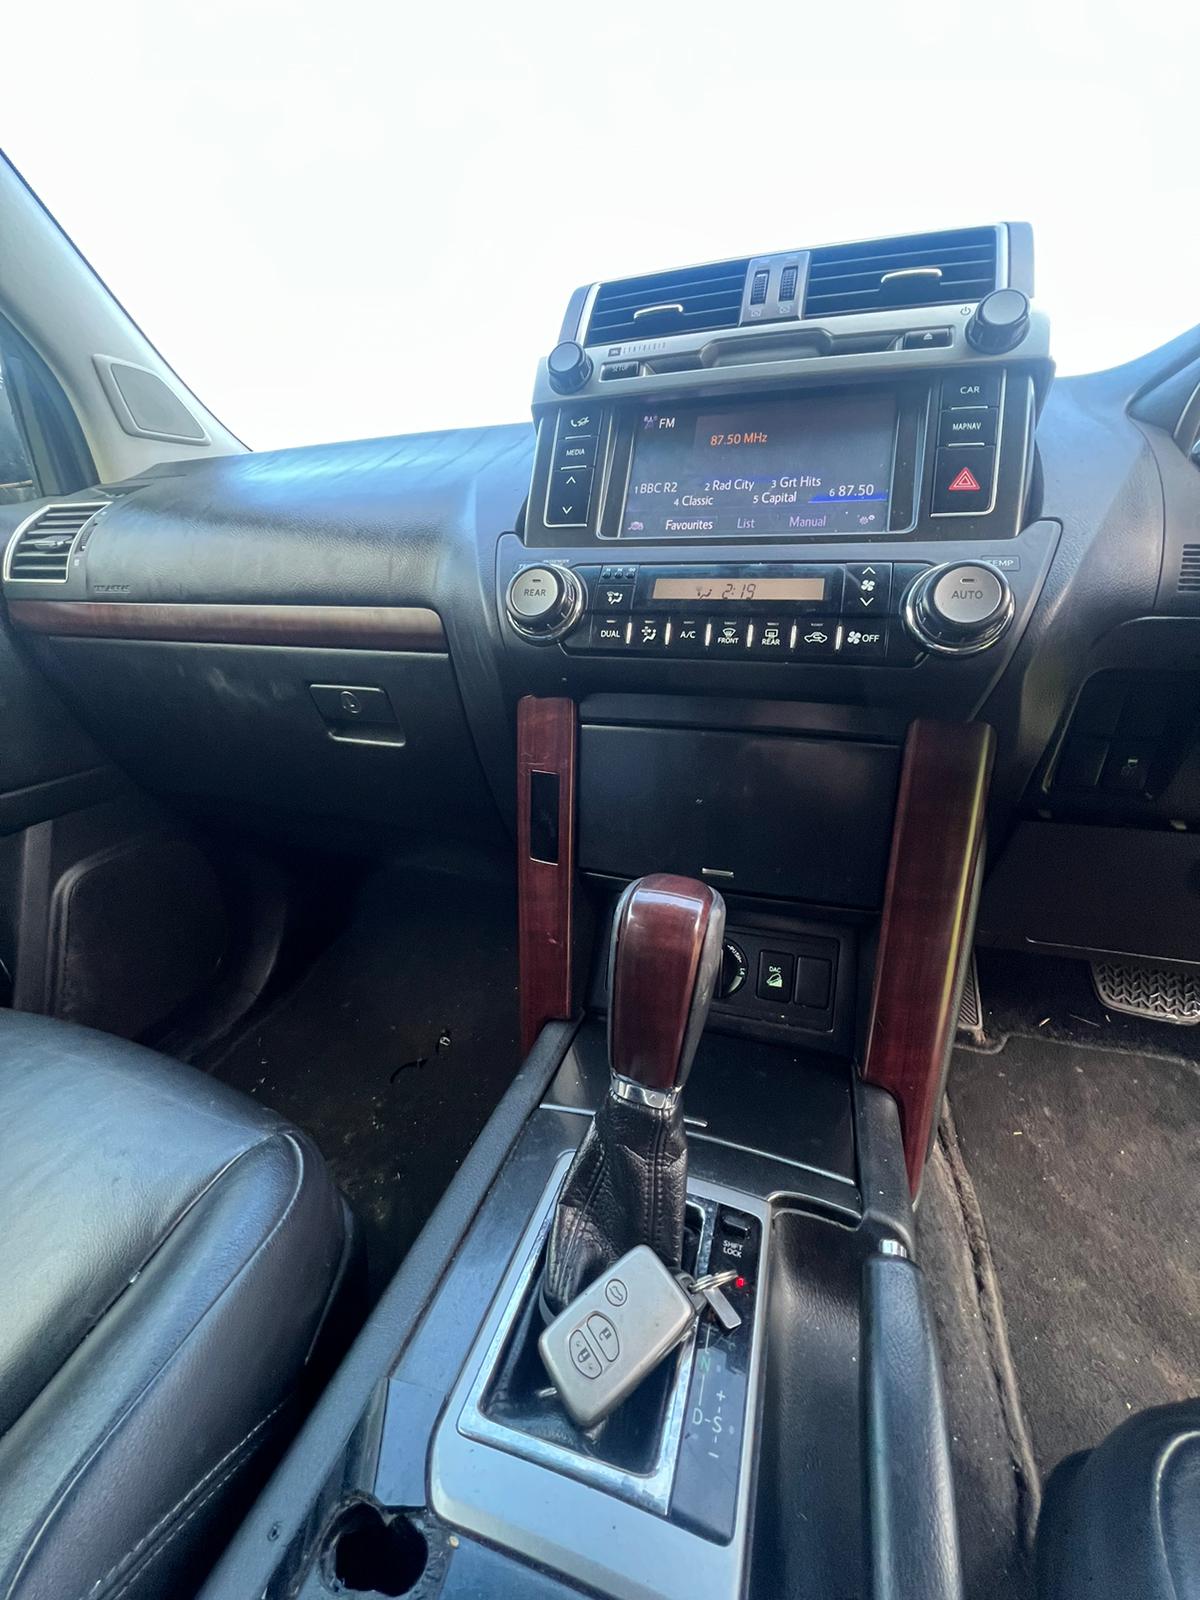 Bid on TOYOTA LAND CRUISER TOP OF THE RANGE FULL LEATHER- Buy &amp; Sell on Auction with EAMA Group